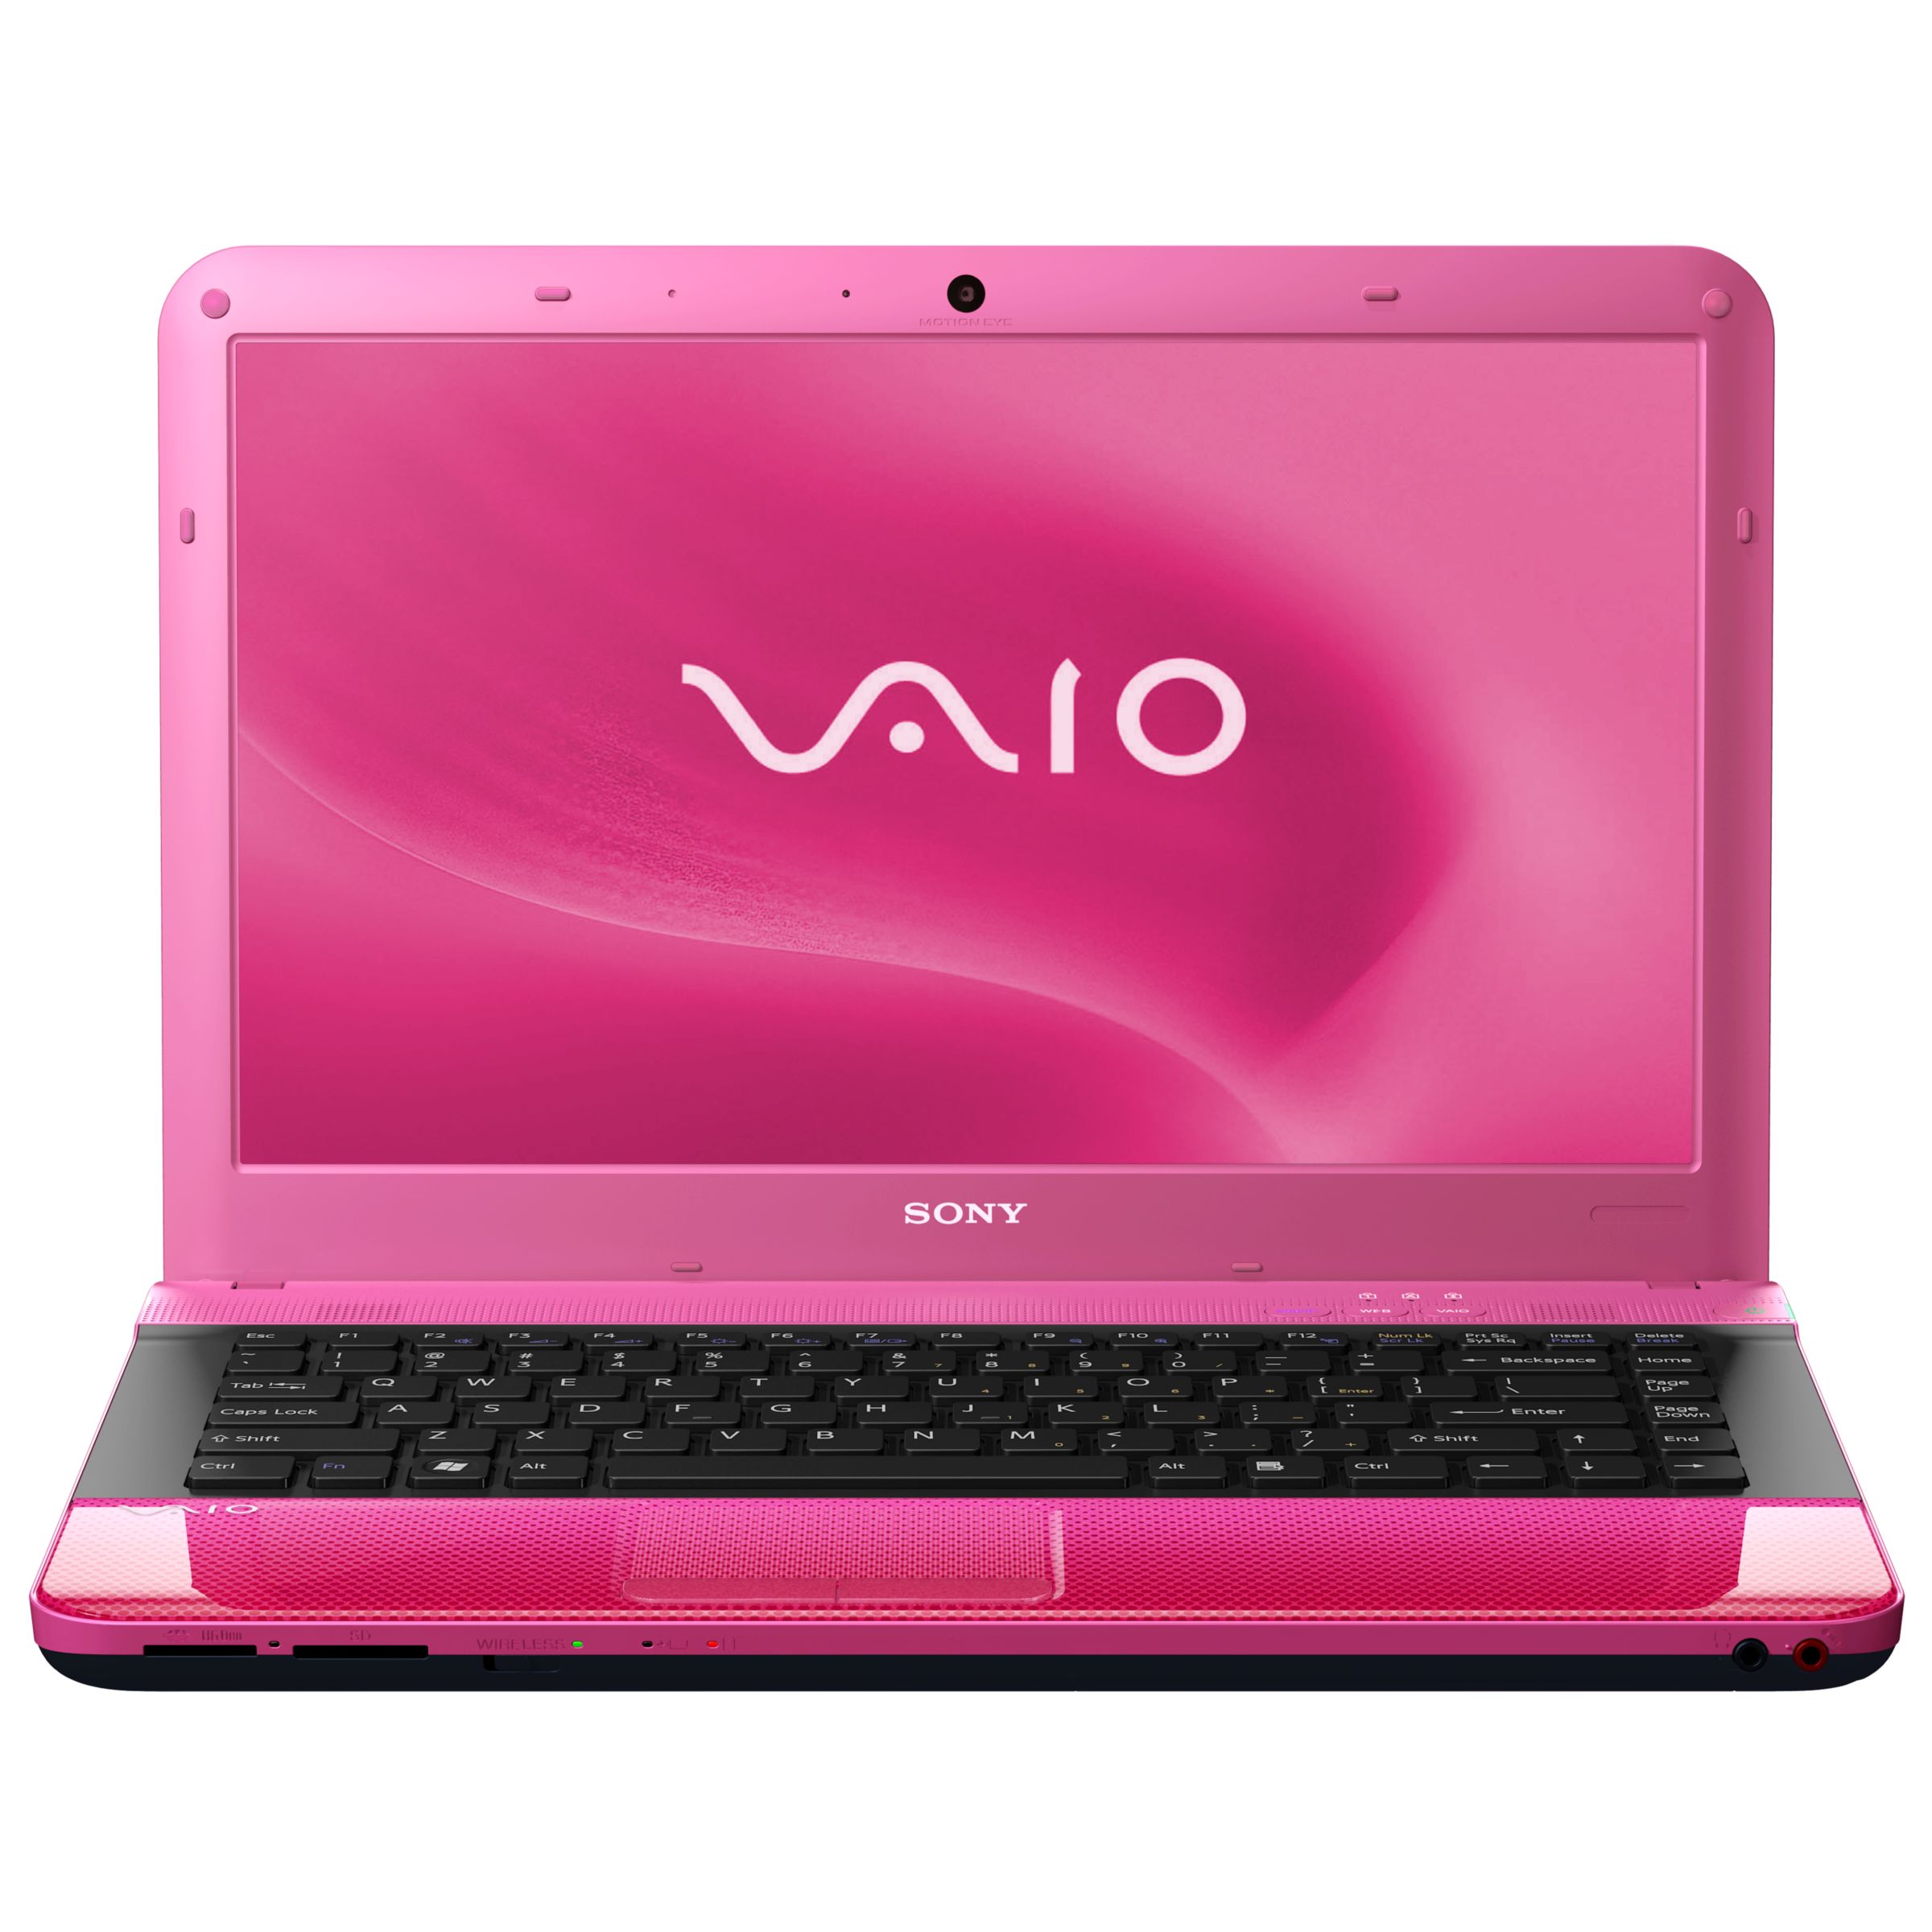 Sony Vaio VPC-EA3S1E/P Laptop, Intel Core i3, 500GB, 2.4GHz with 14 Inch Display, Pink at John Lewis